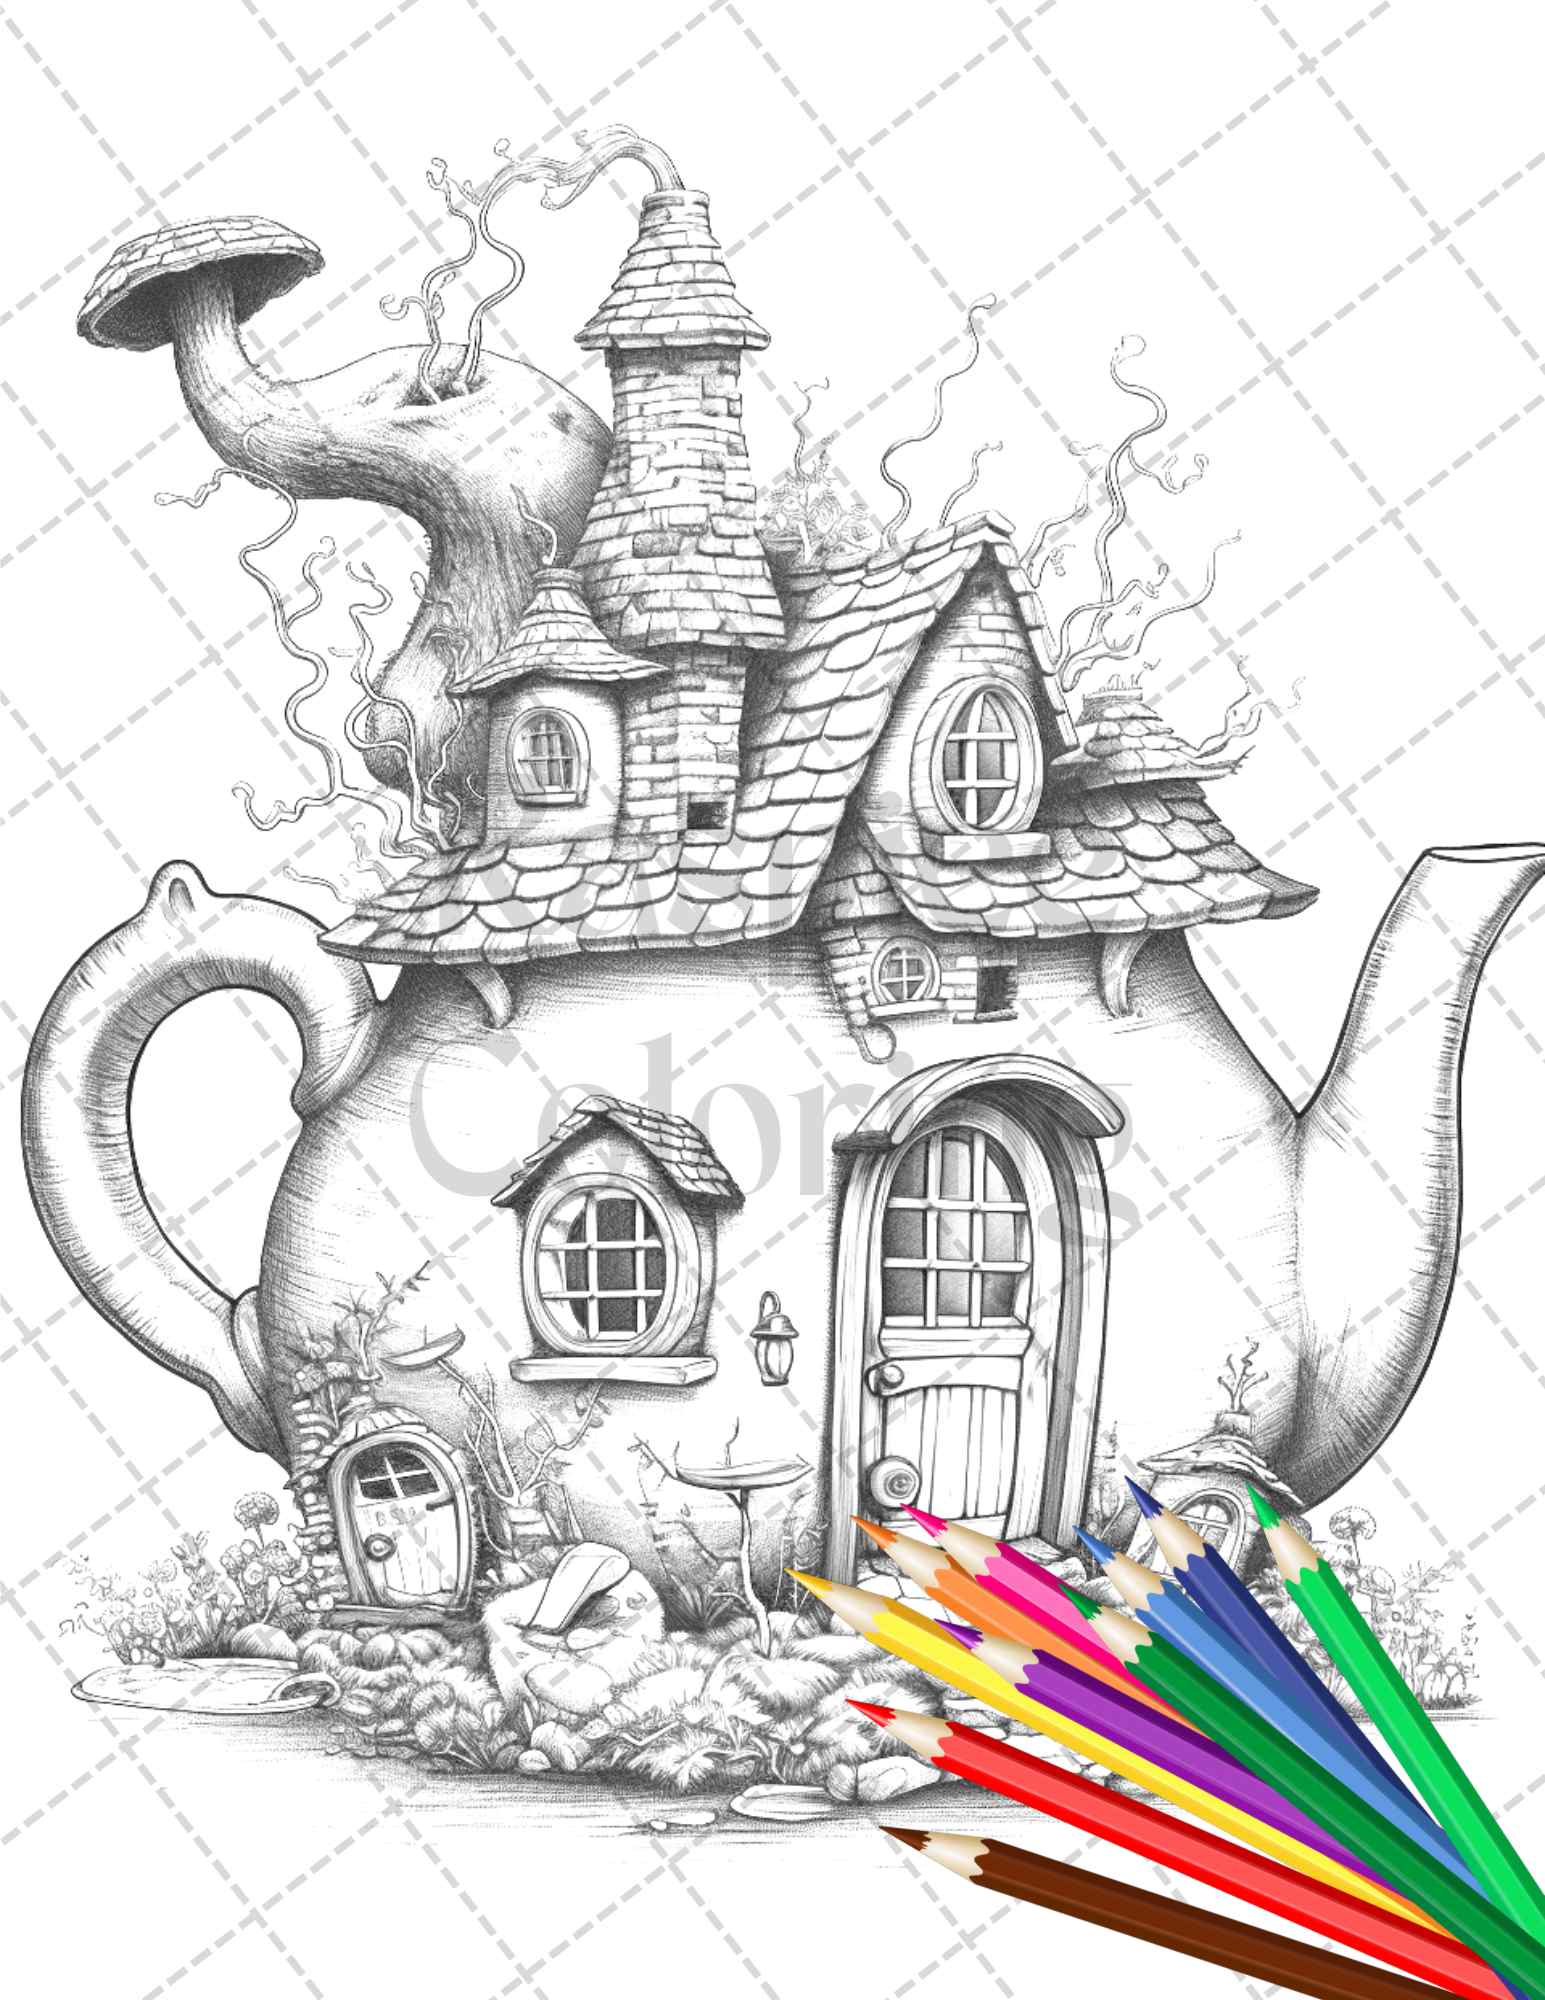 40 Teapot Fairy Houses Grayscale Coloring Pages Printable for Adults, PDF File Instant Download - raspiee